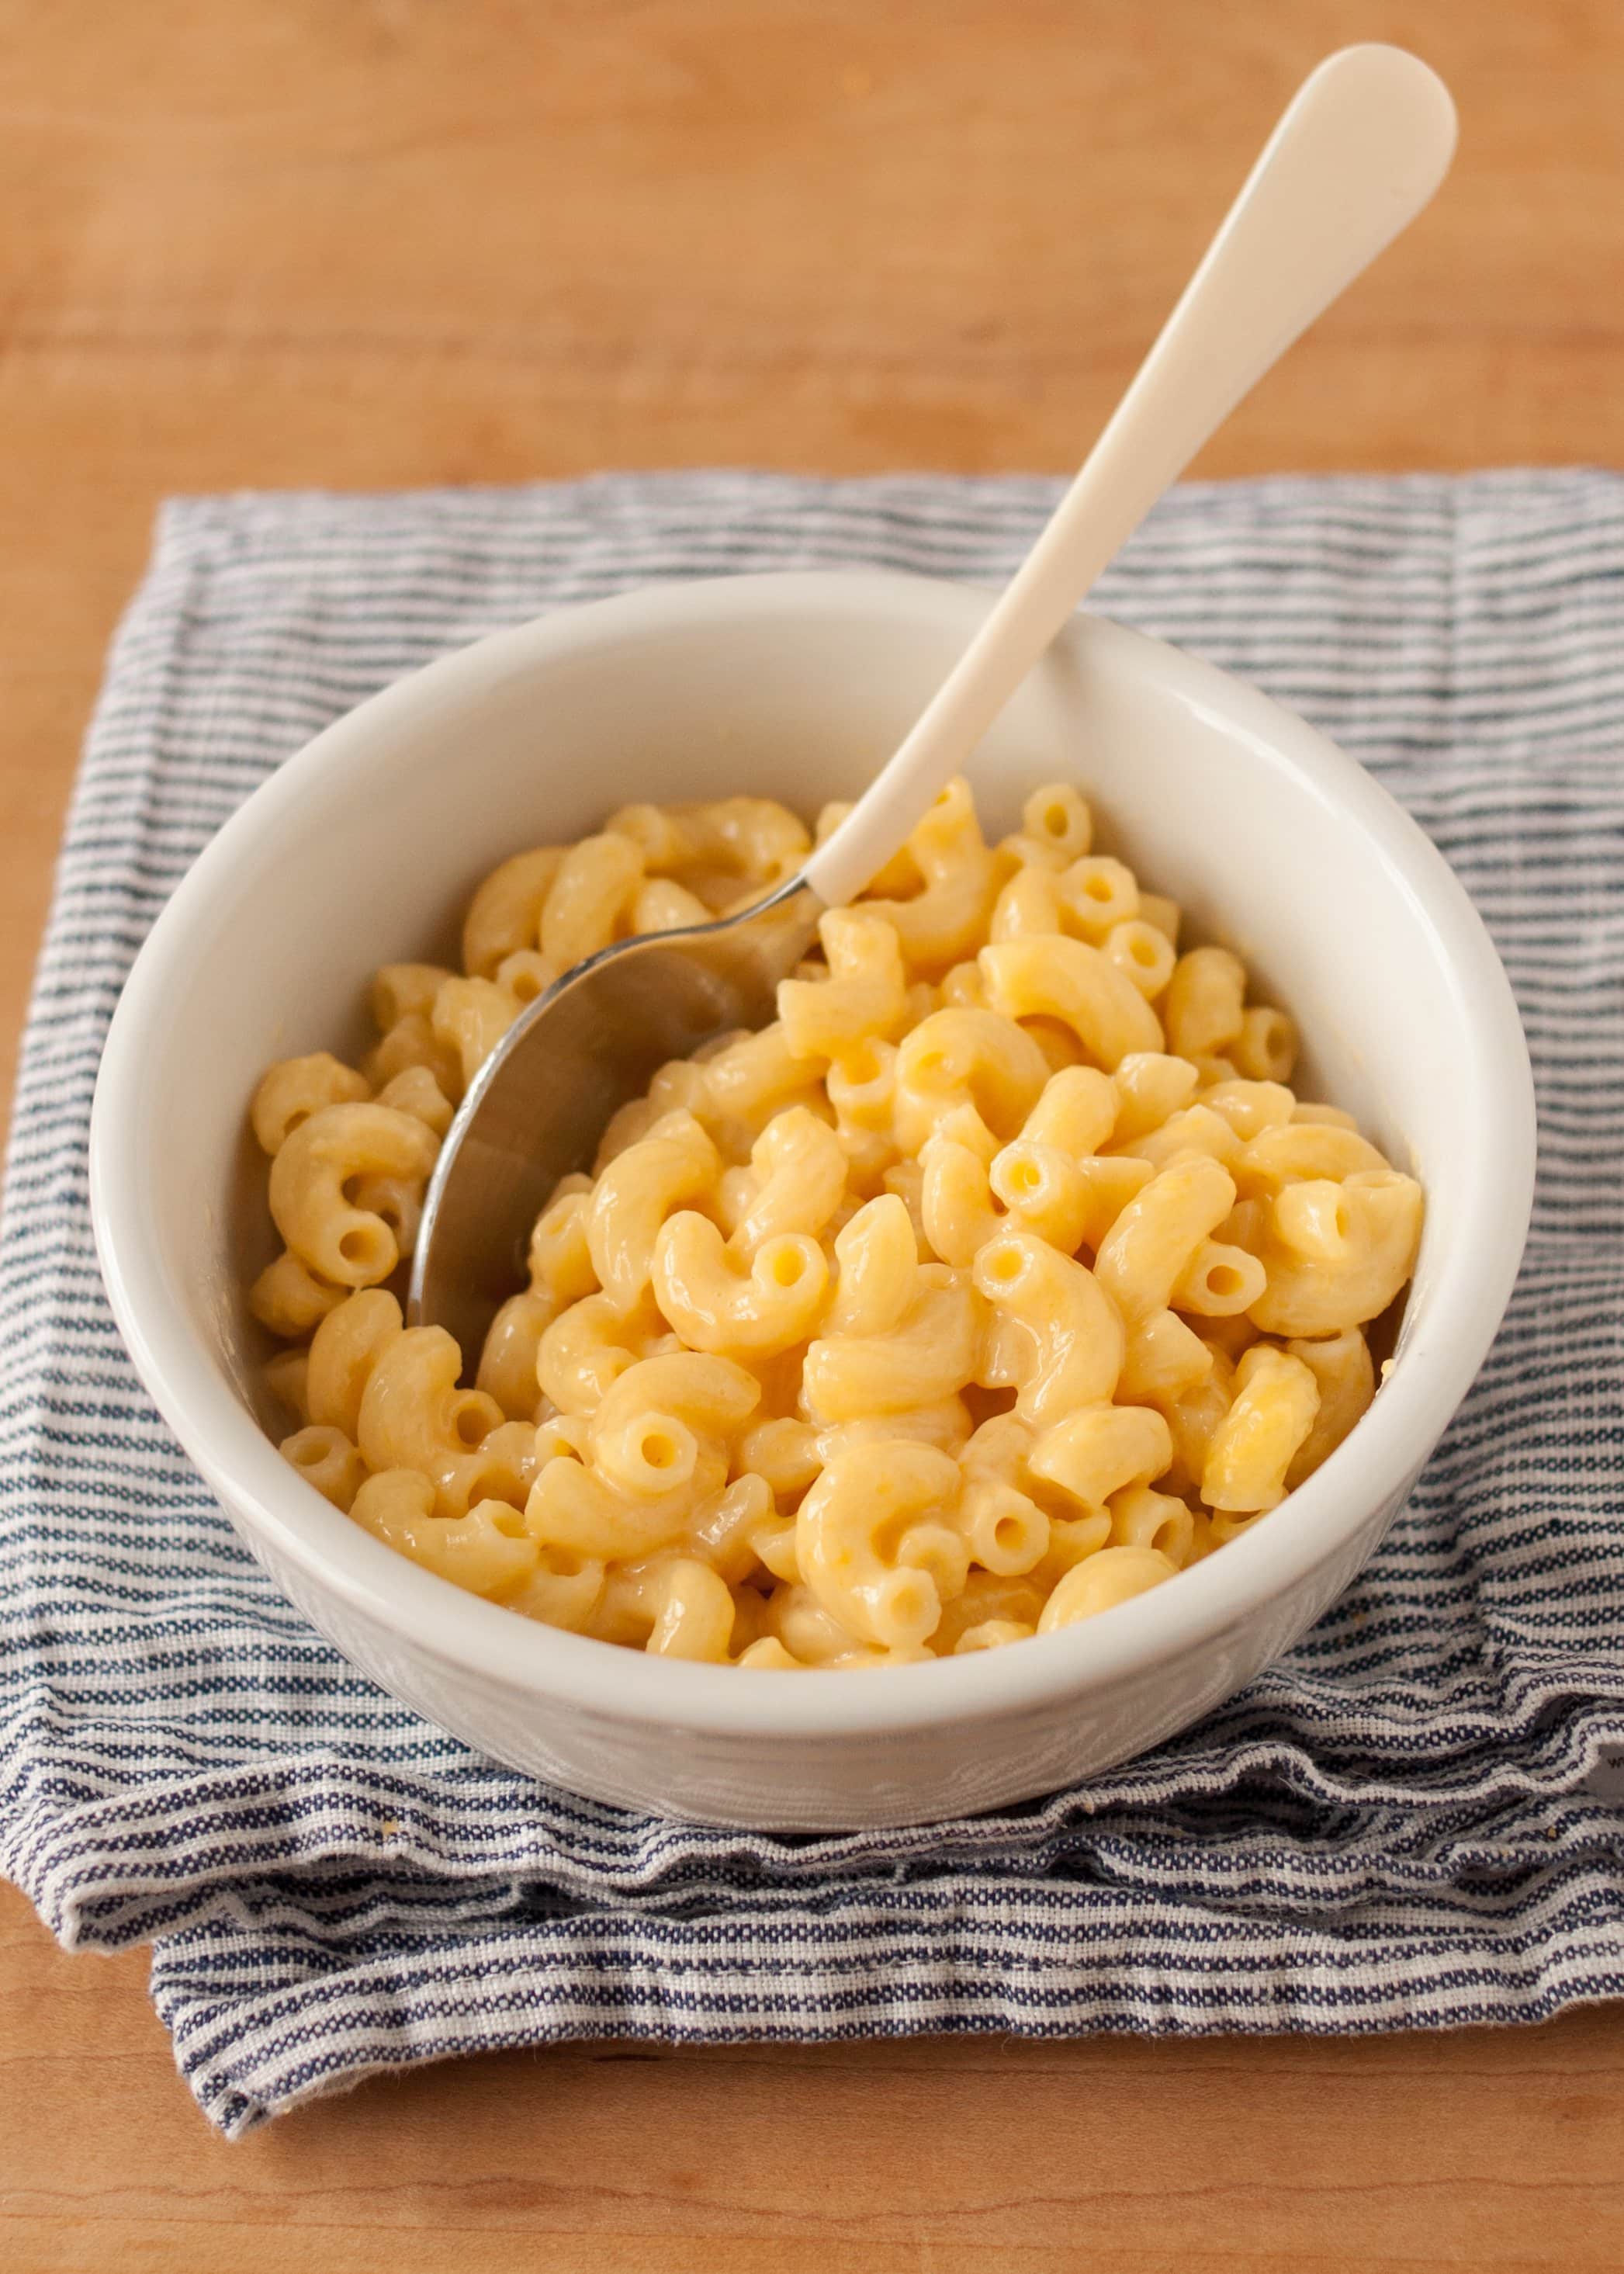 Macaroni And Cheese In A Bowl Stock Photo Image 25990832